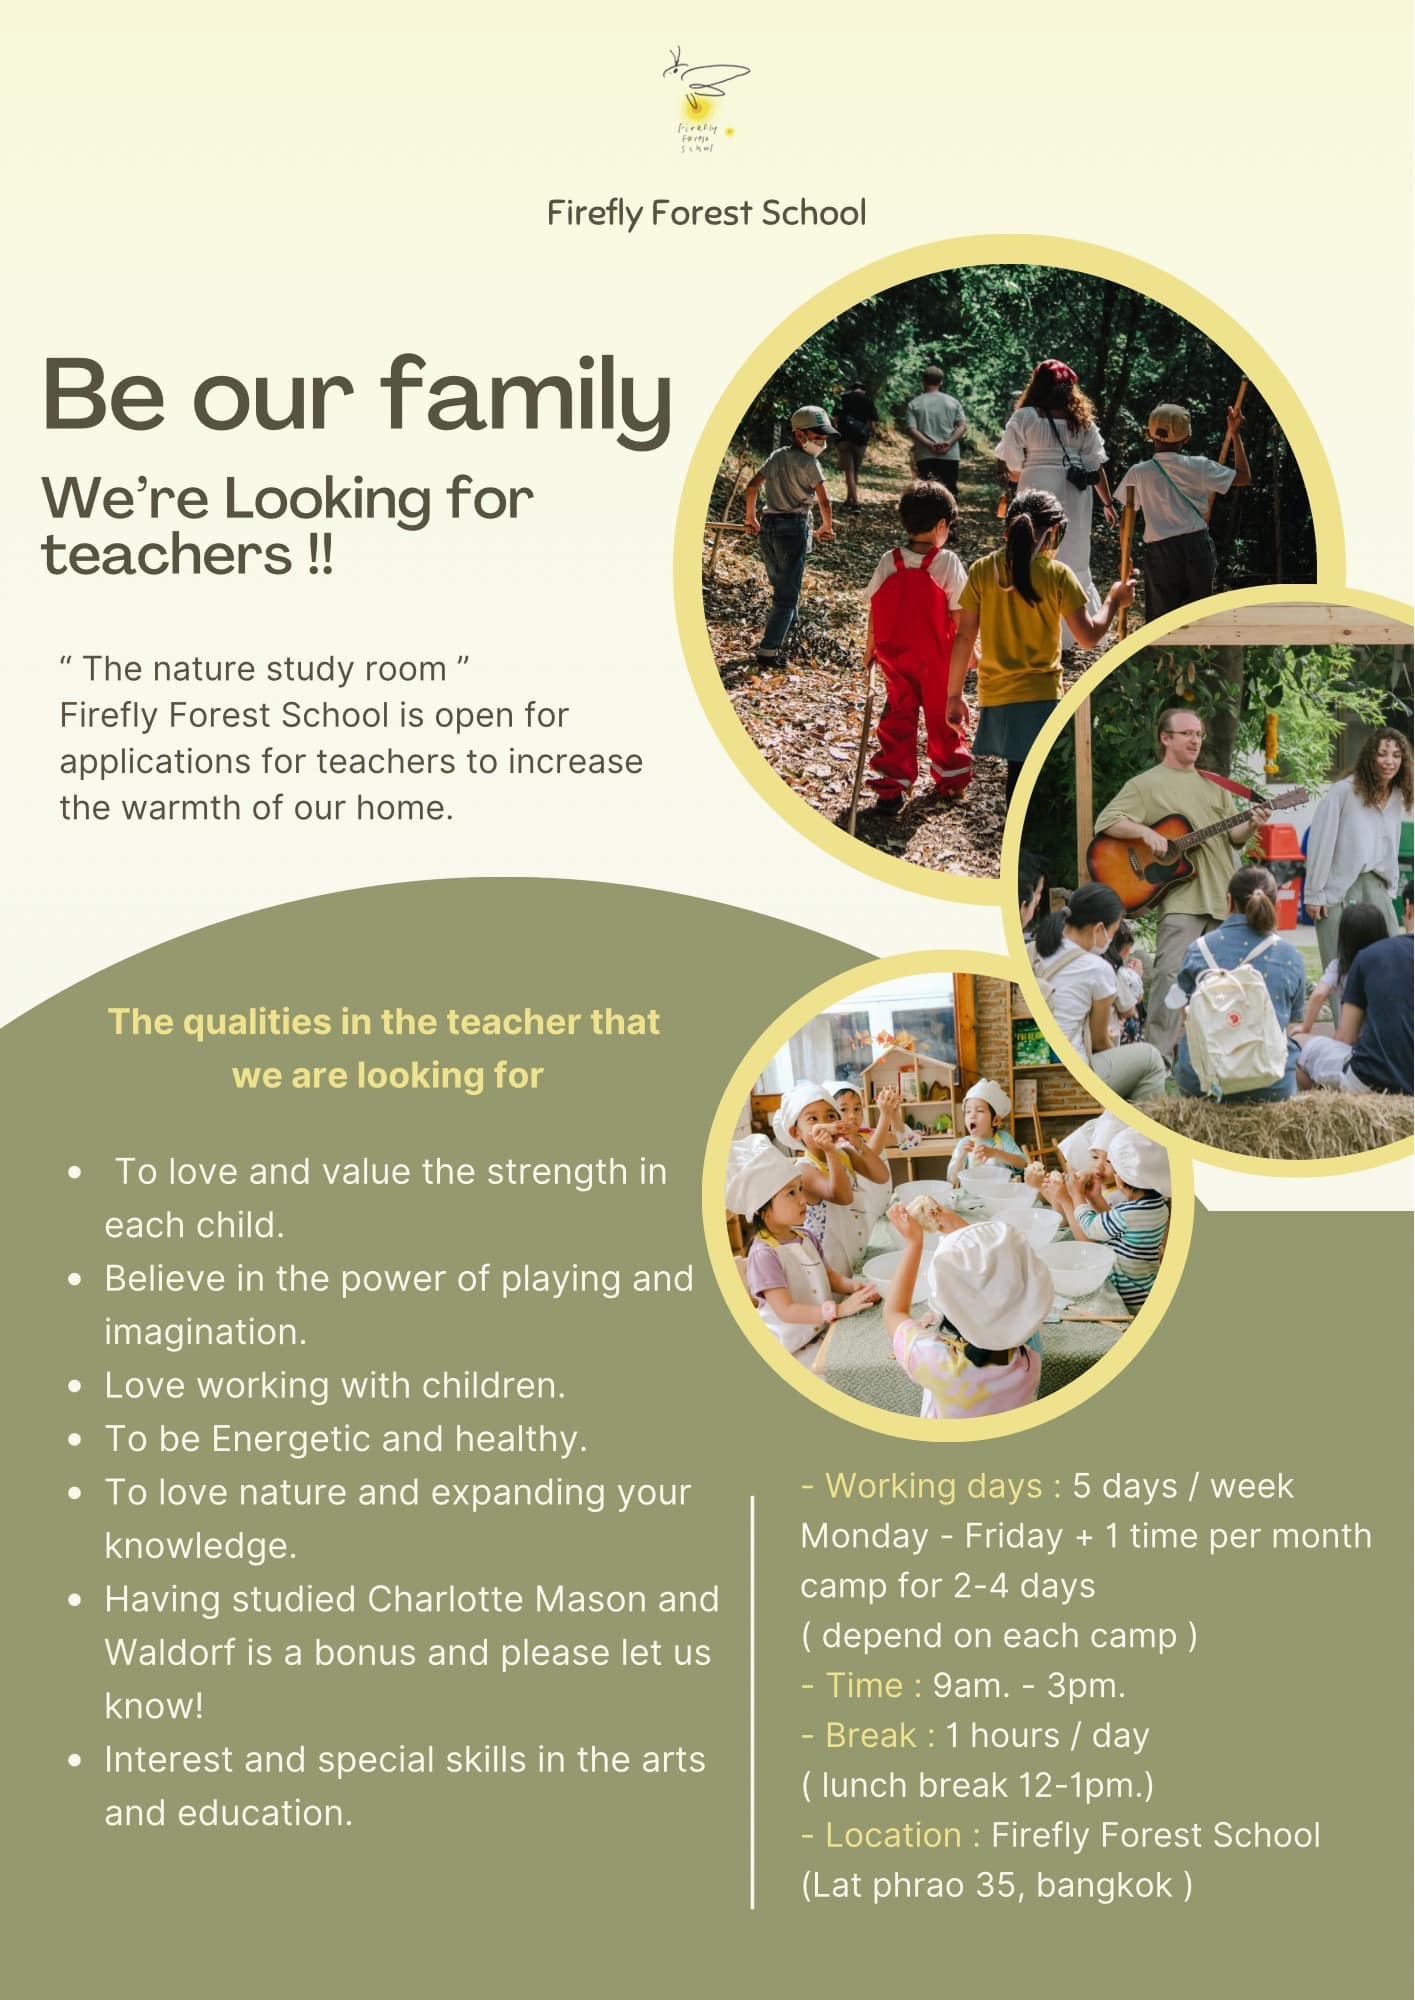 We are Looking for teachers!! 
 “The nature study room” Firefly Forest School is open for applications for tea…